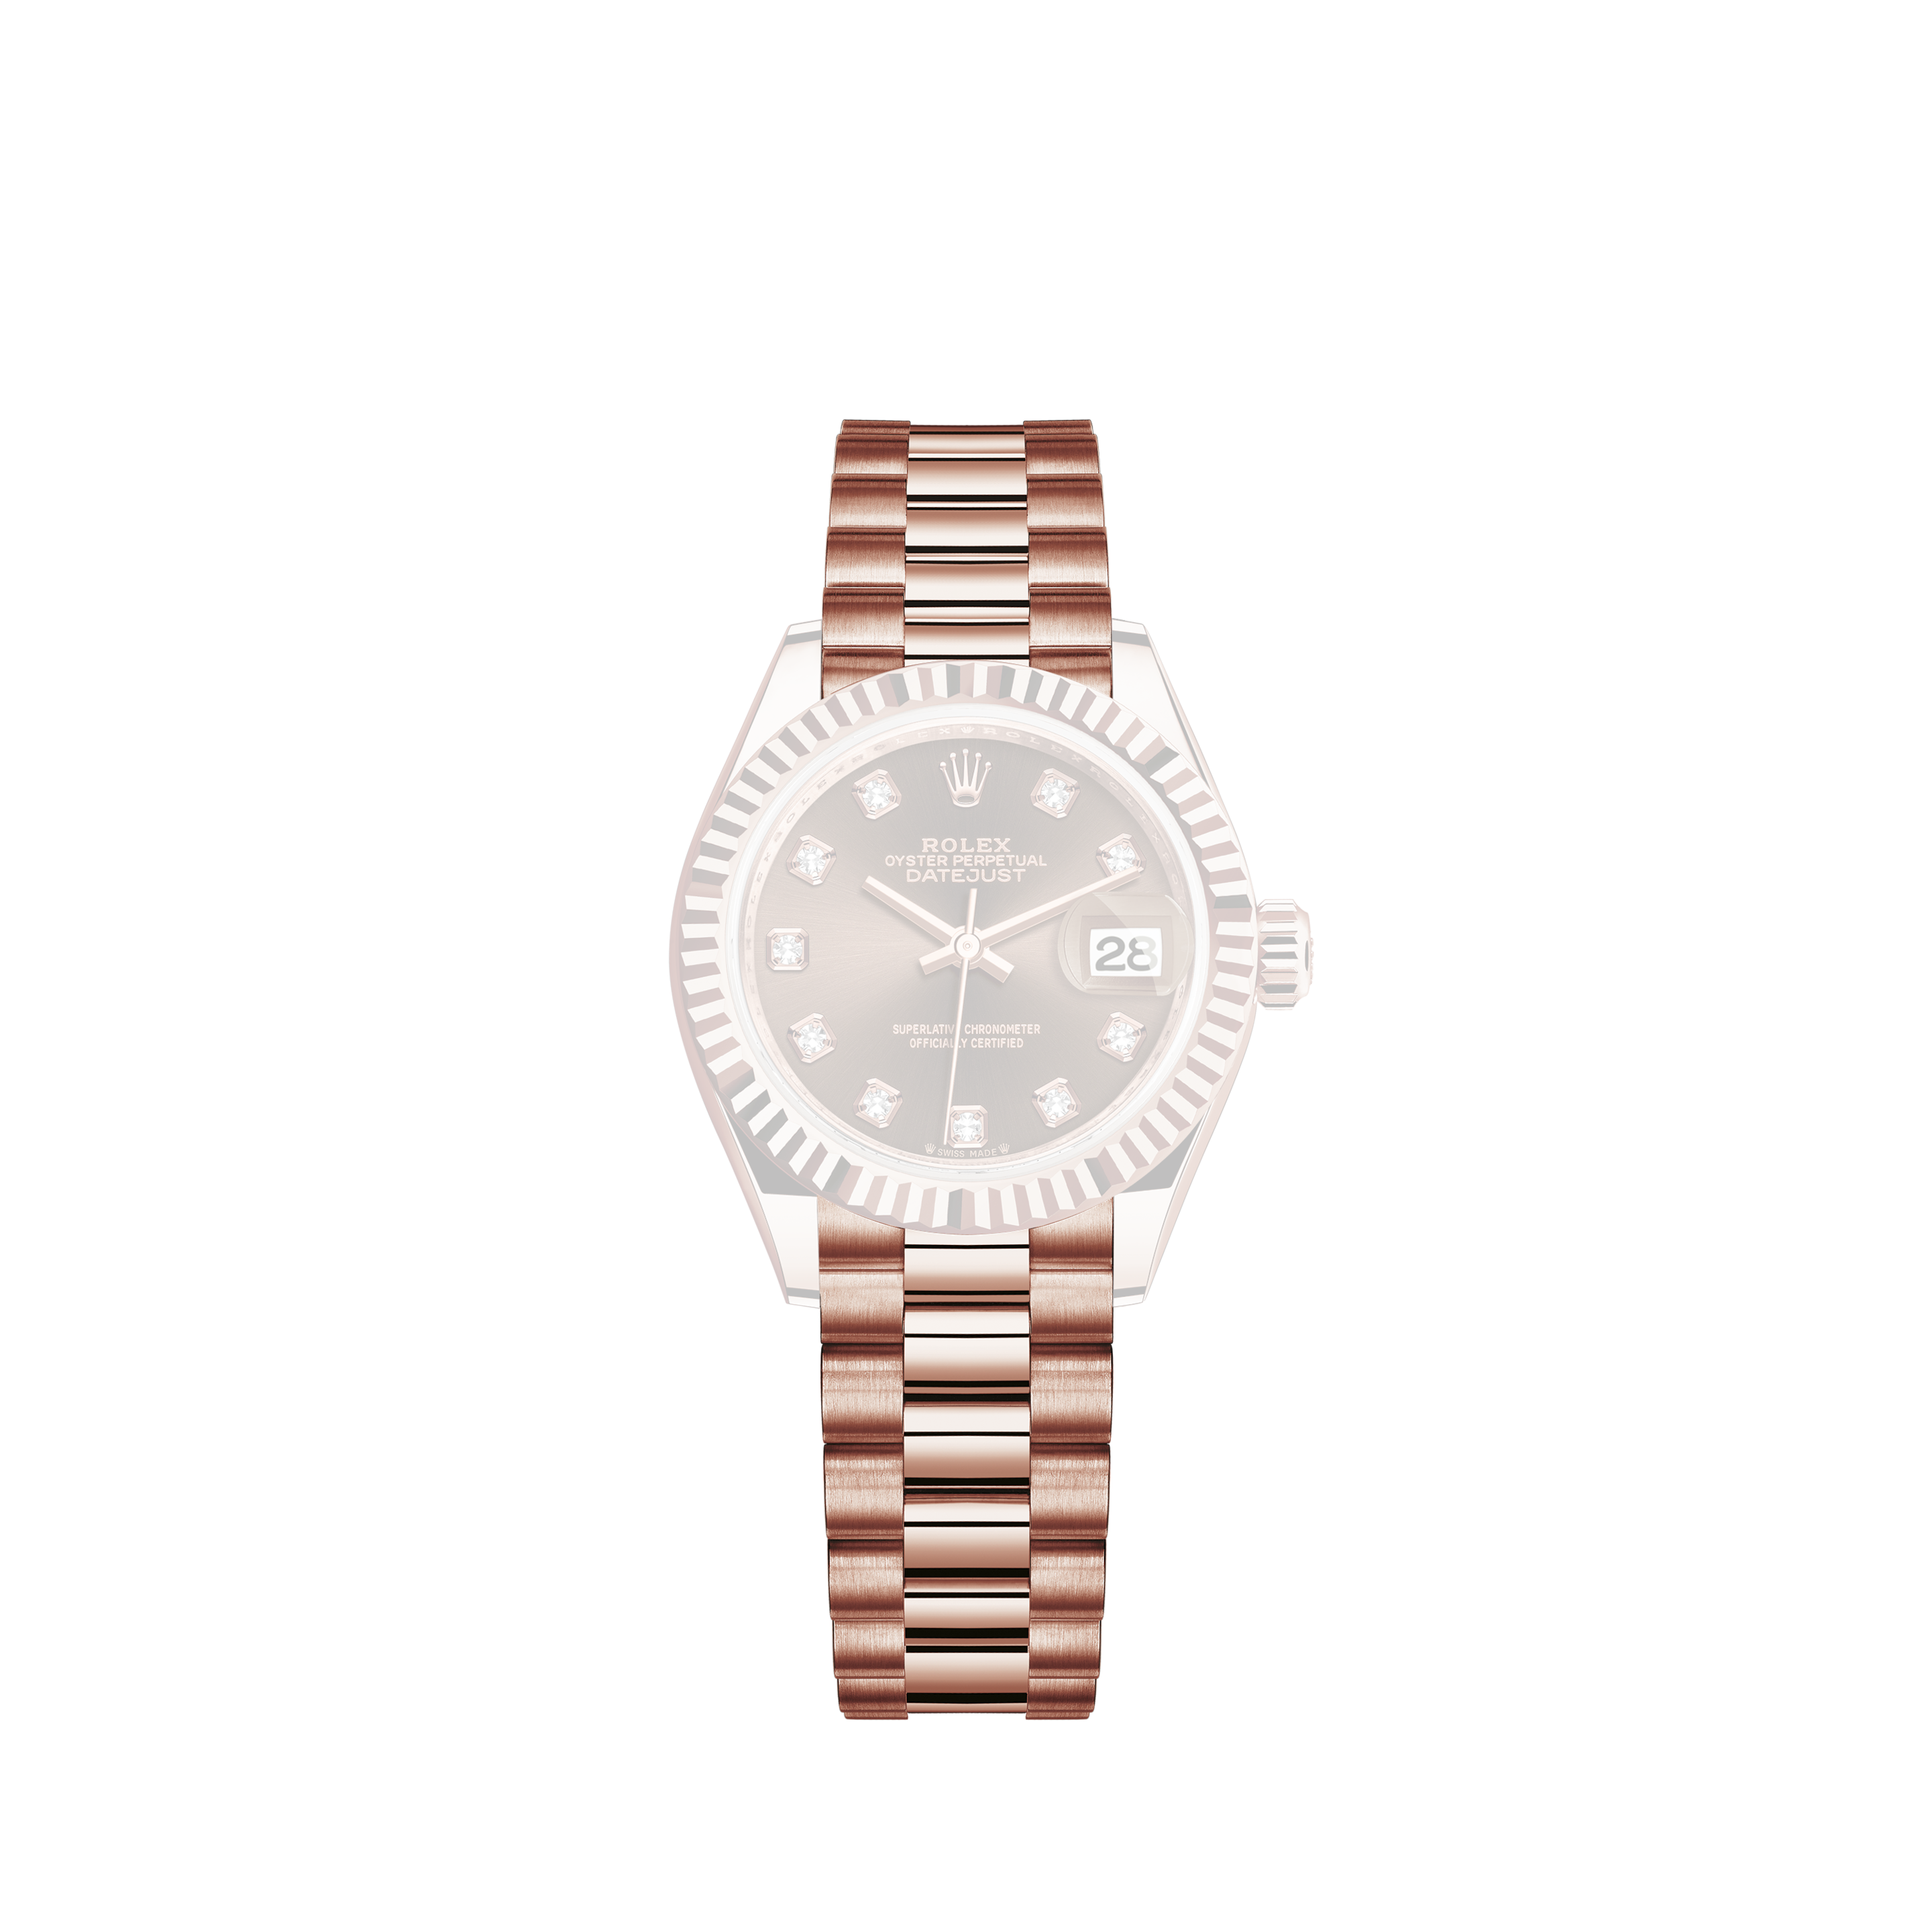 Rolex Datejust Oyster Perpetual Modell Nr. 15200